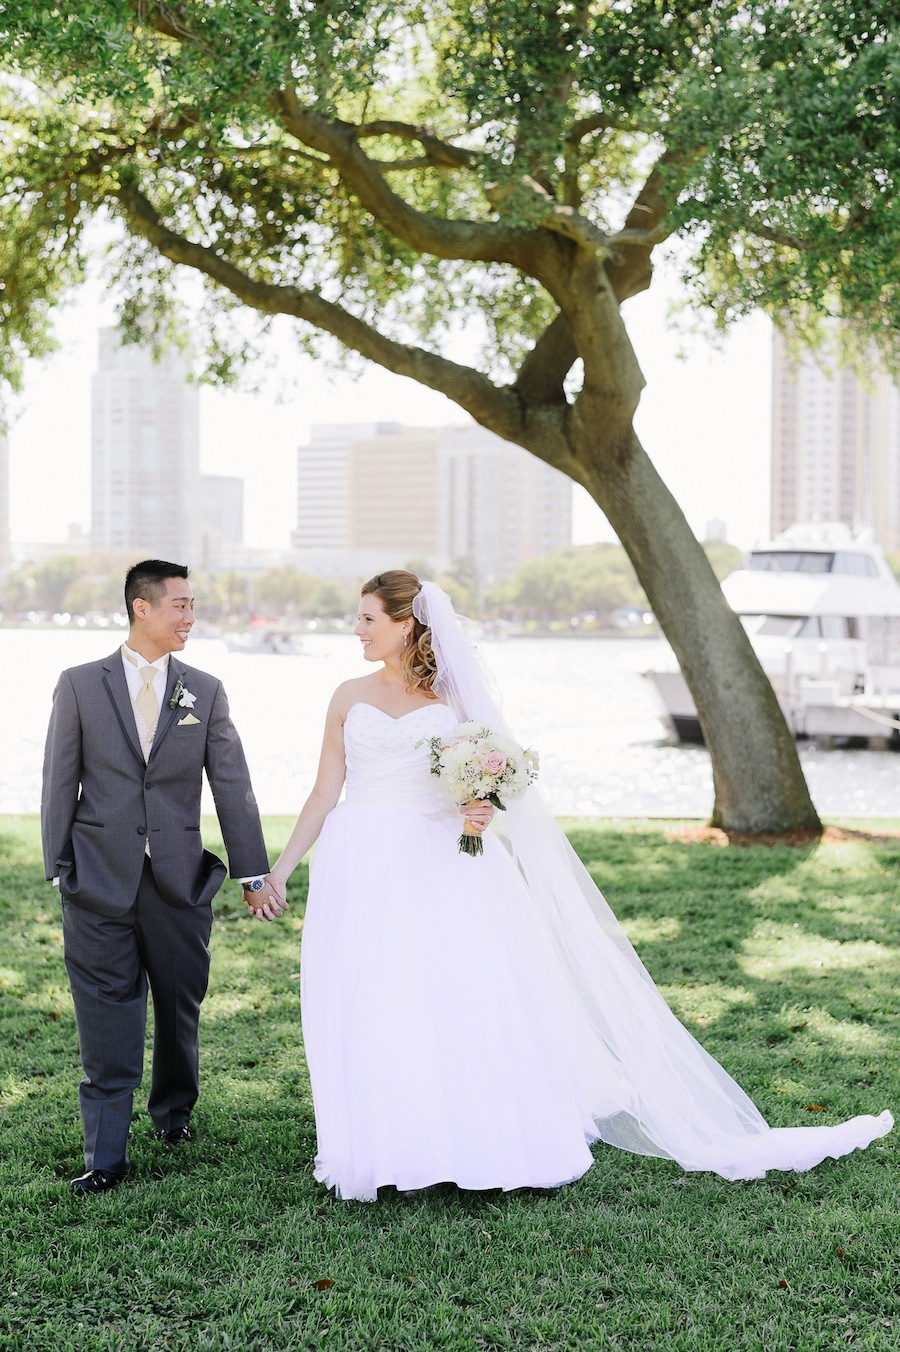 Downtown St. Pete Bride and Groom Wedding Portrait | St. Petersburg Wedding Photographer Sunglow Photography